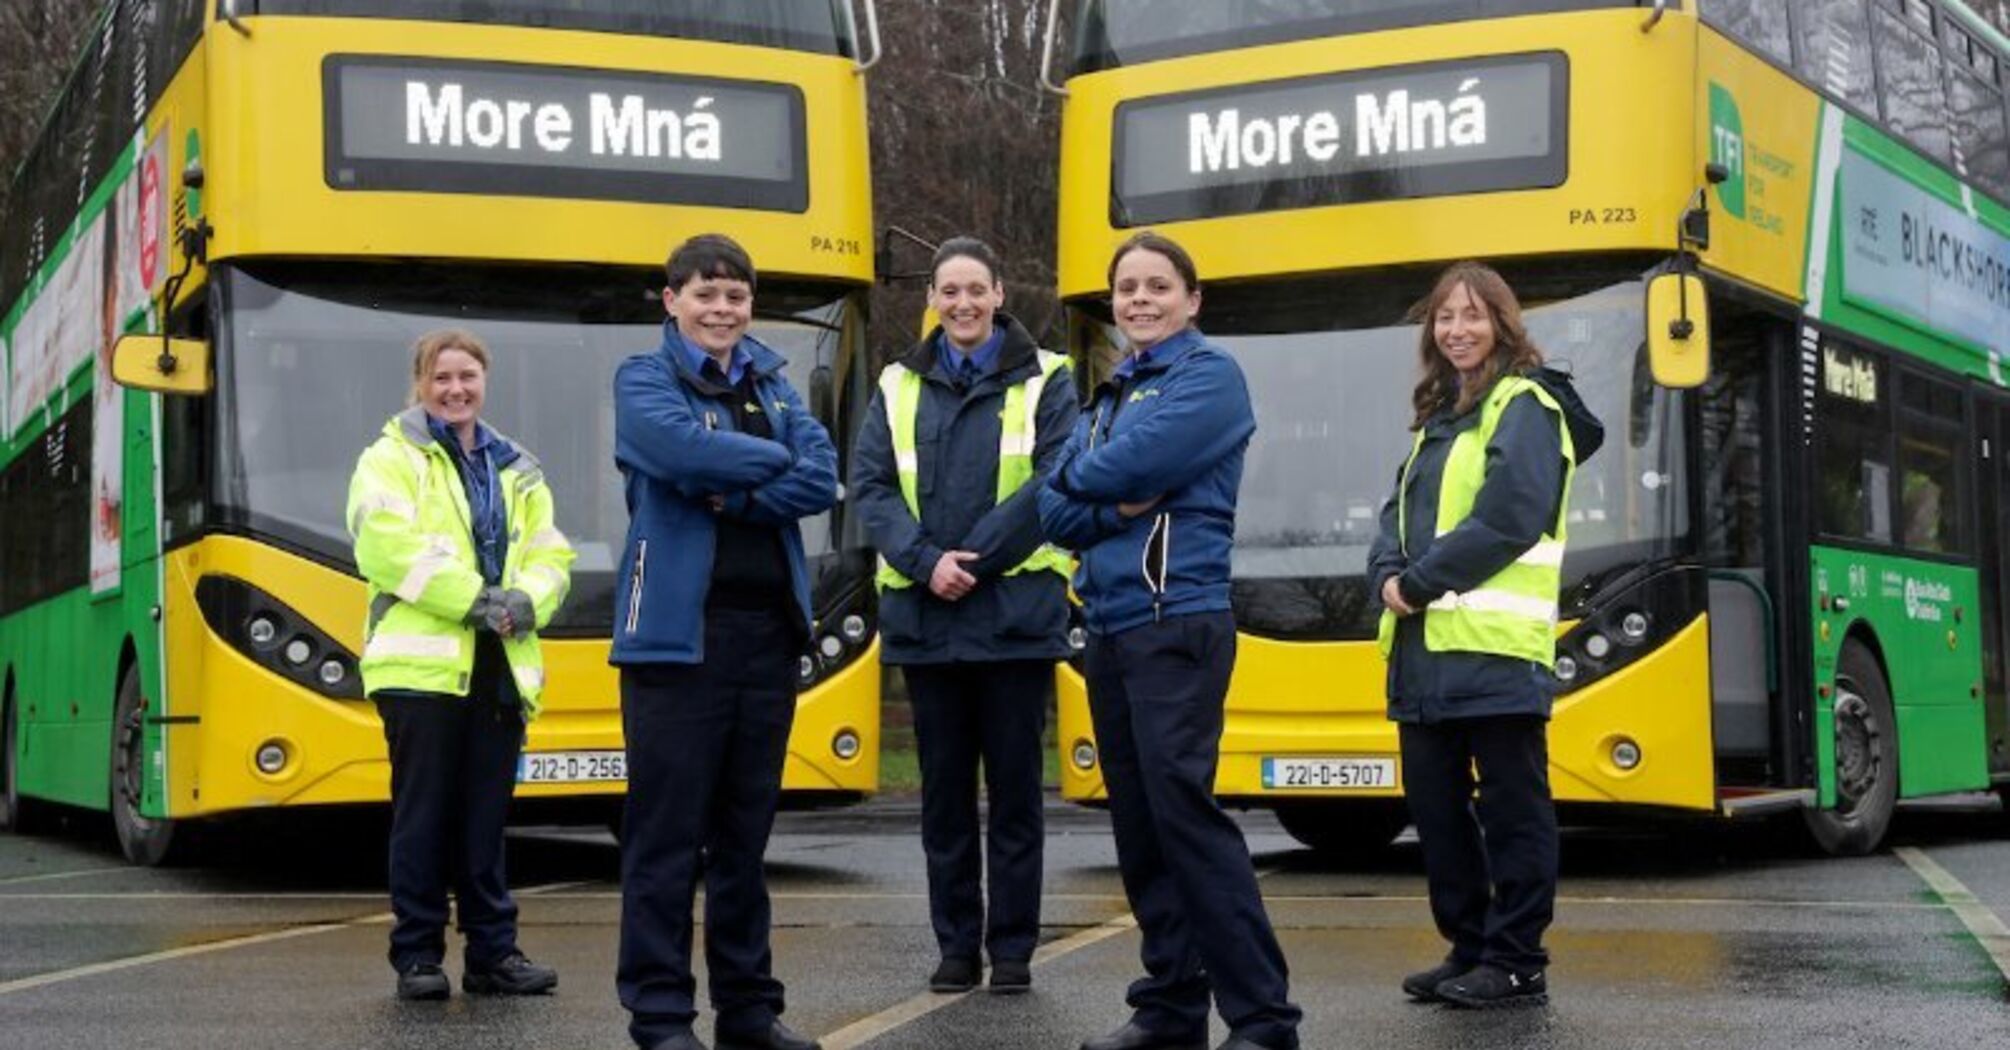 Dublin wants to double the number of female bus drivers: salary announced